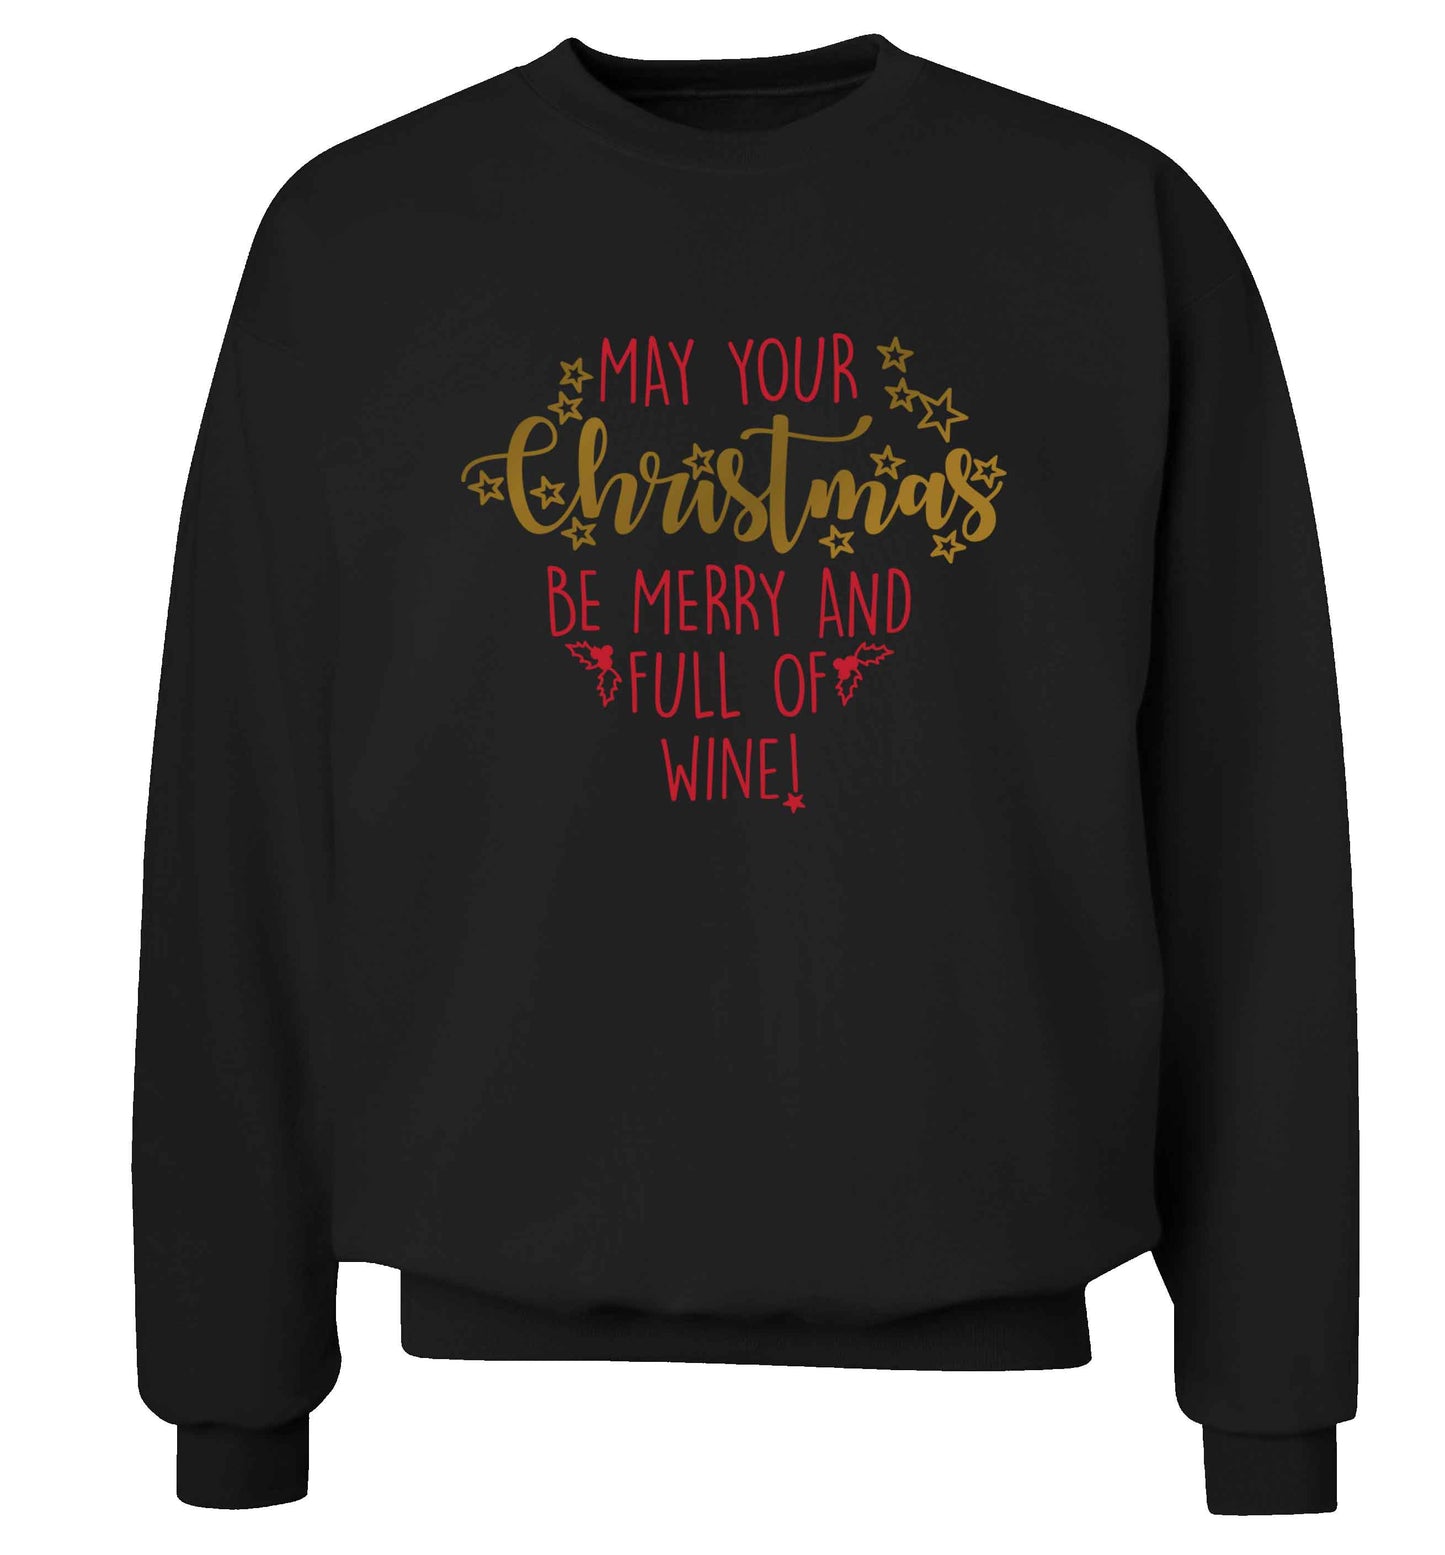 May your Christmas be merry and full of wine Adult's unisex black Sweater 2XL